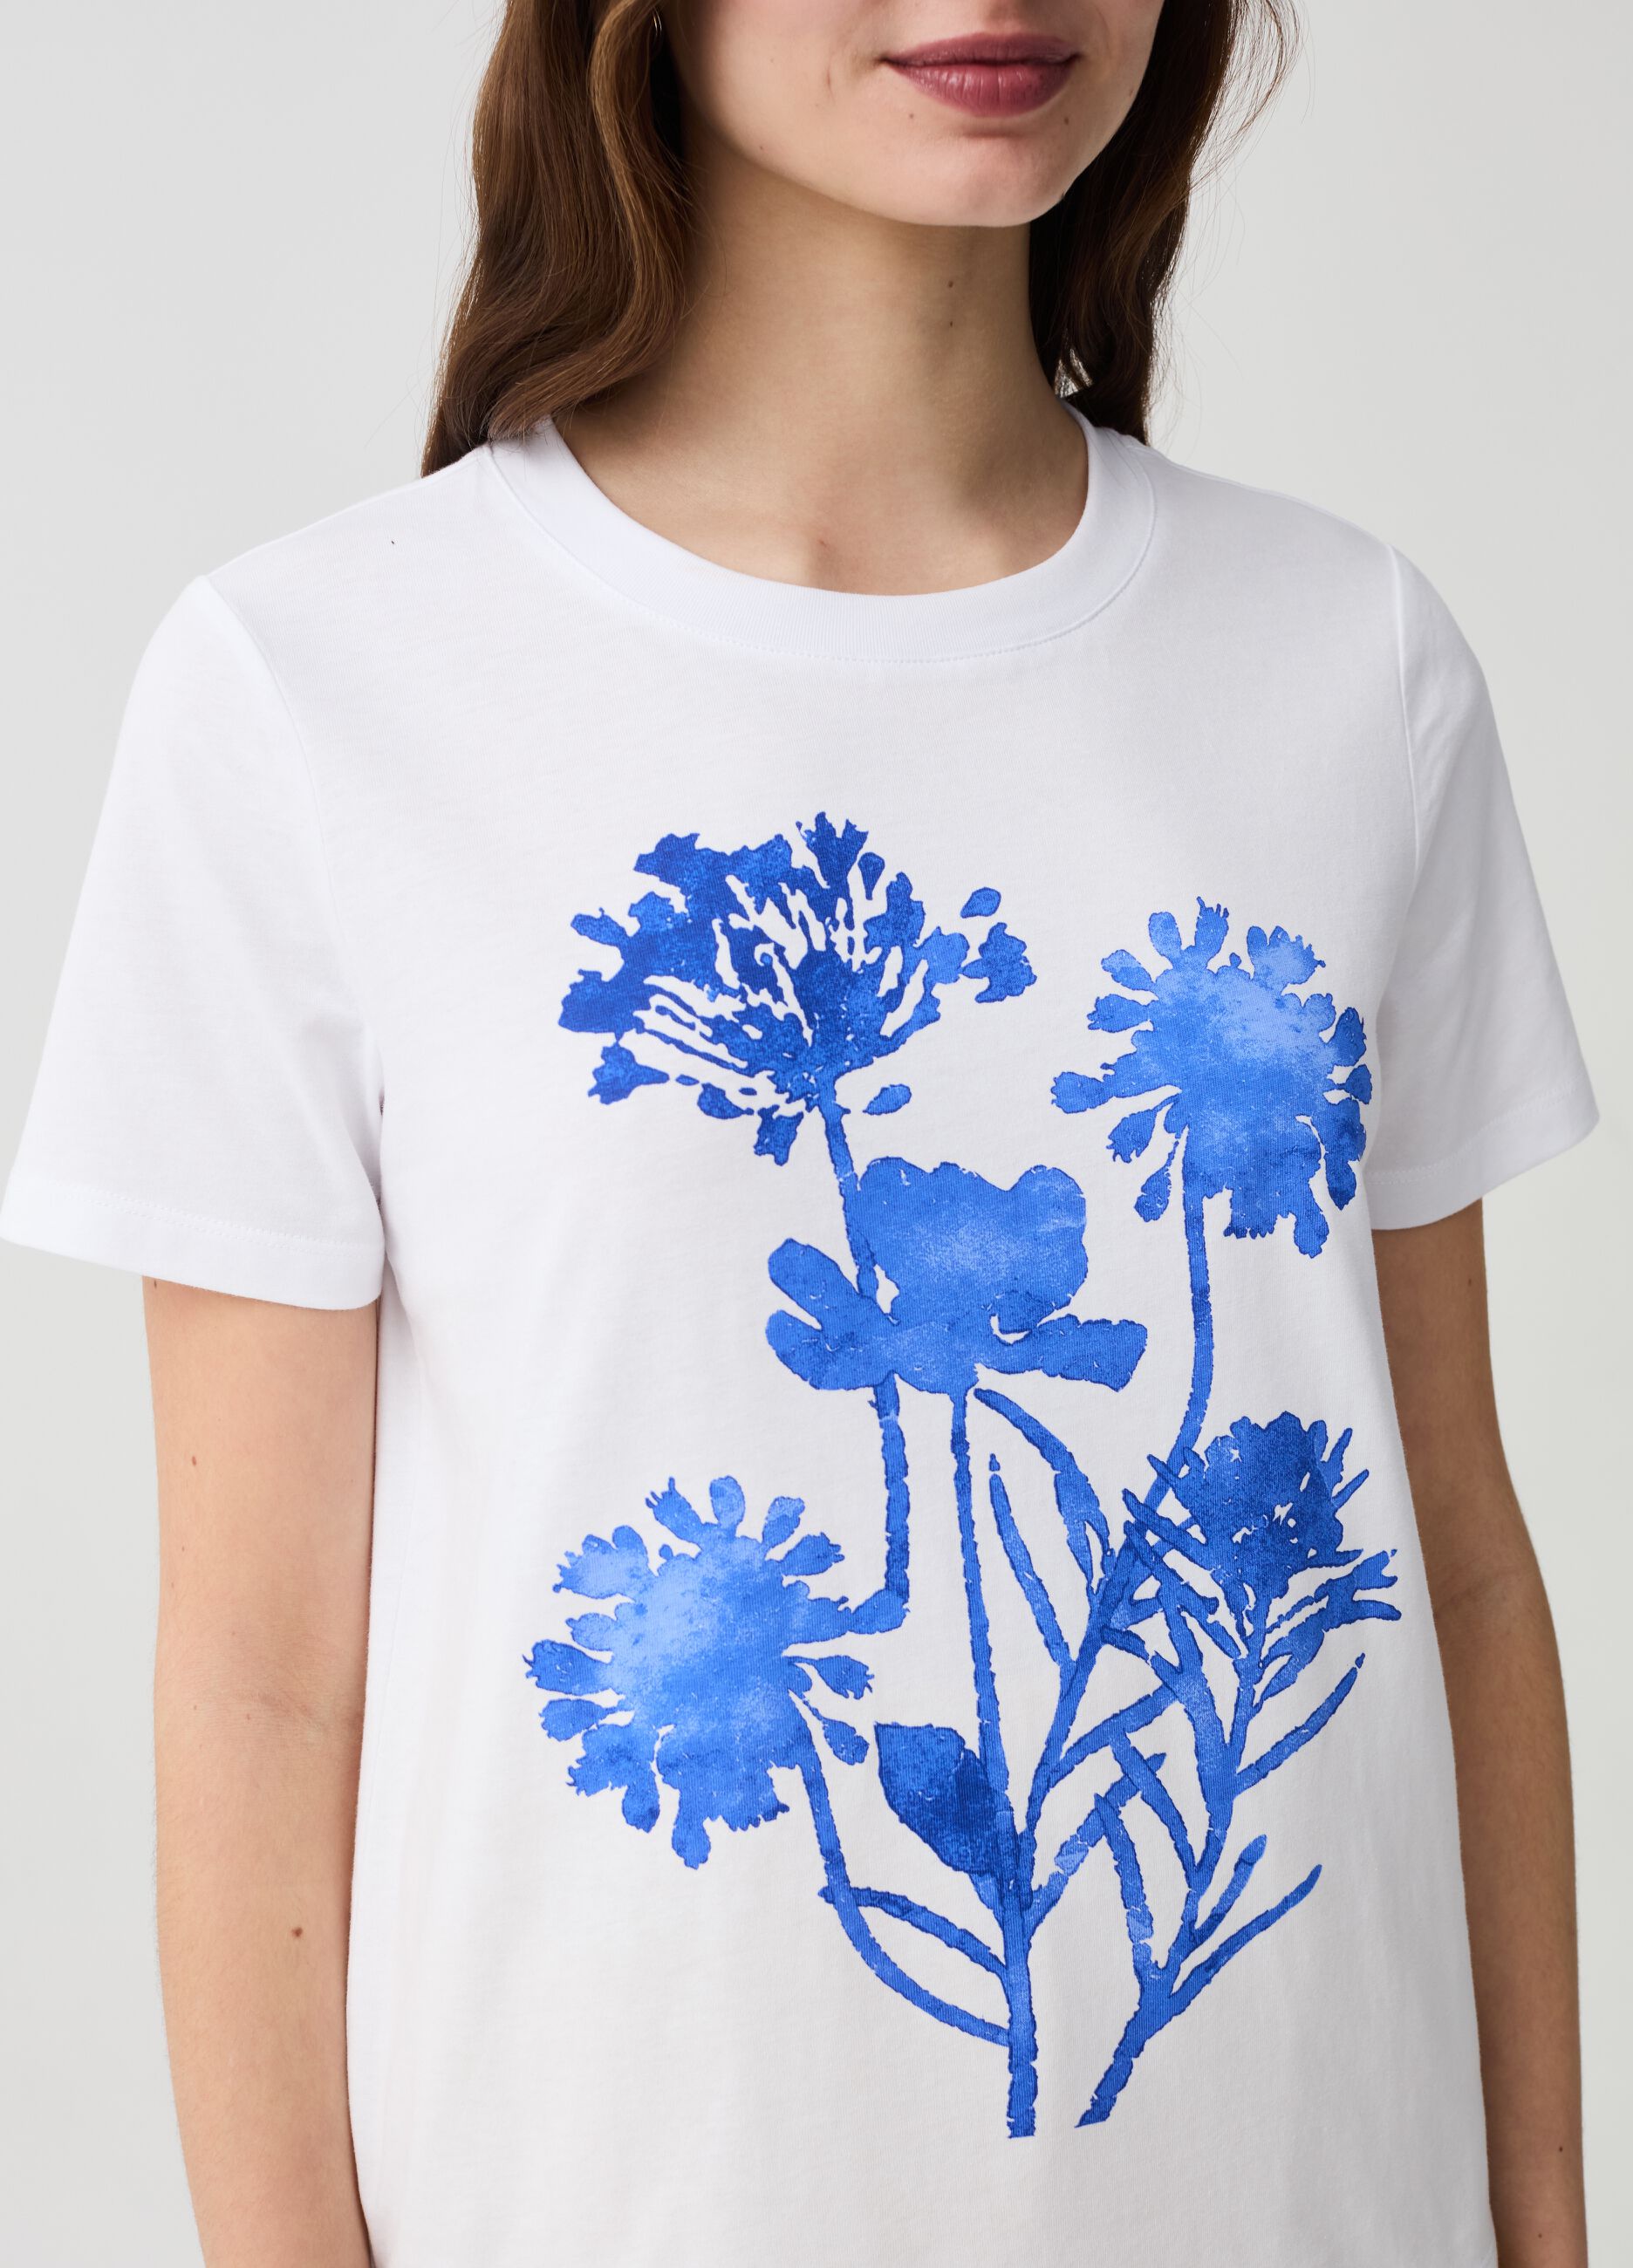 T-shirt in cotone con stampa floreale